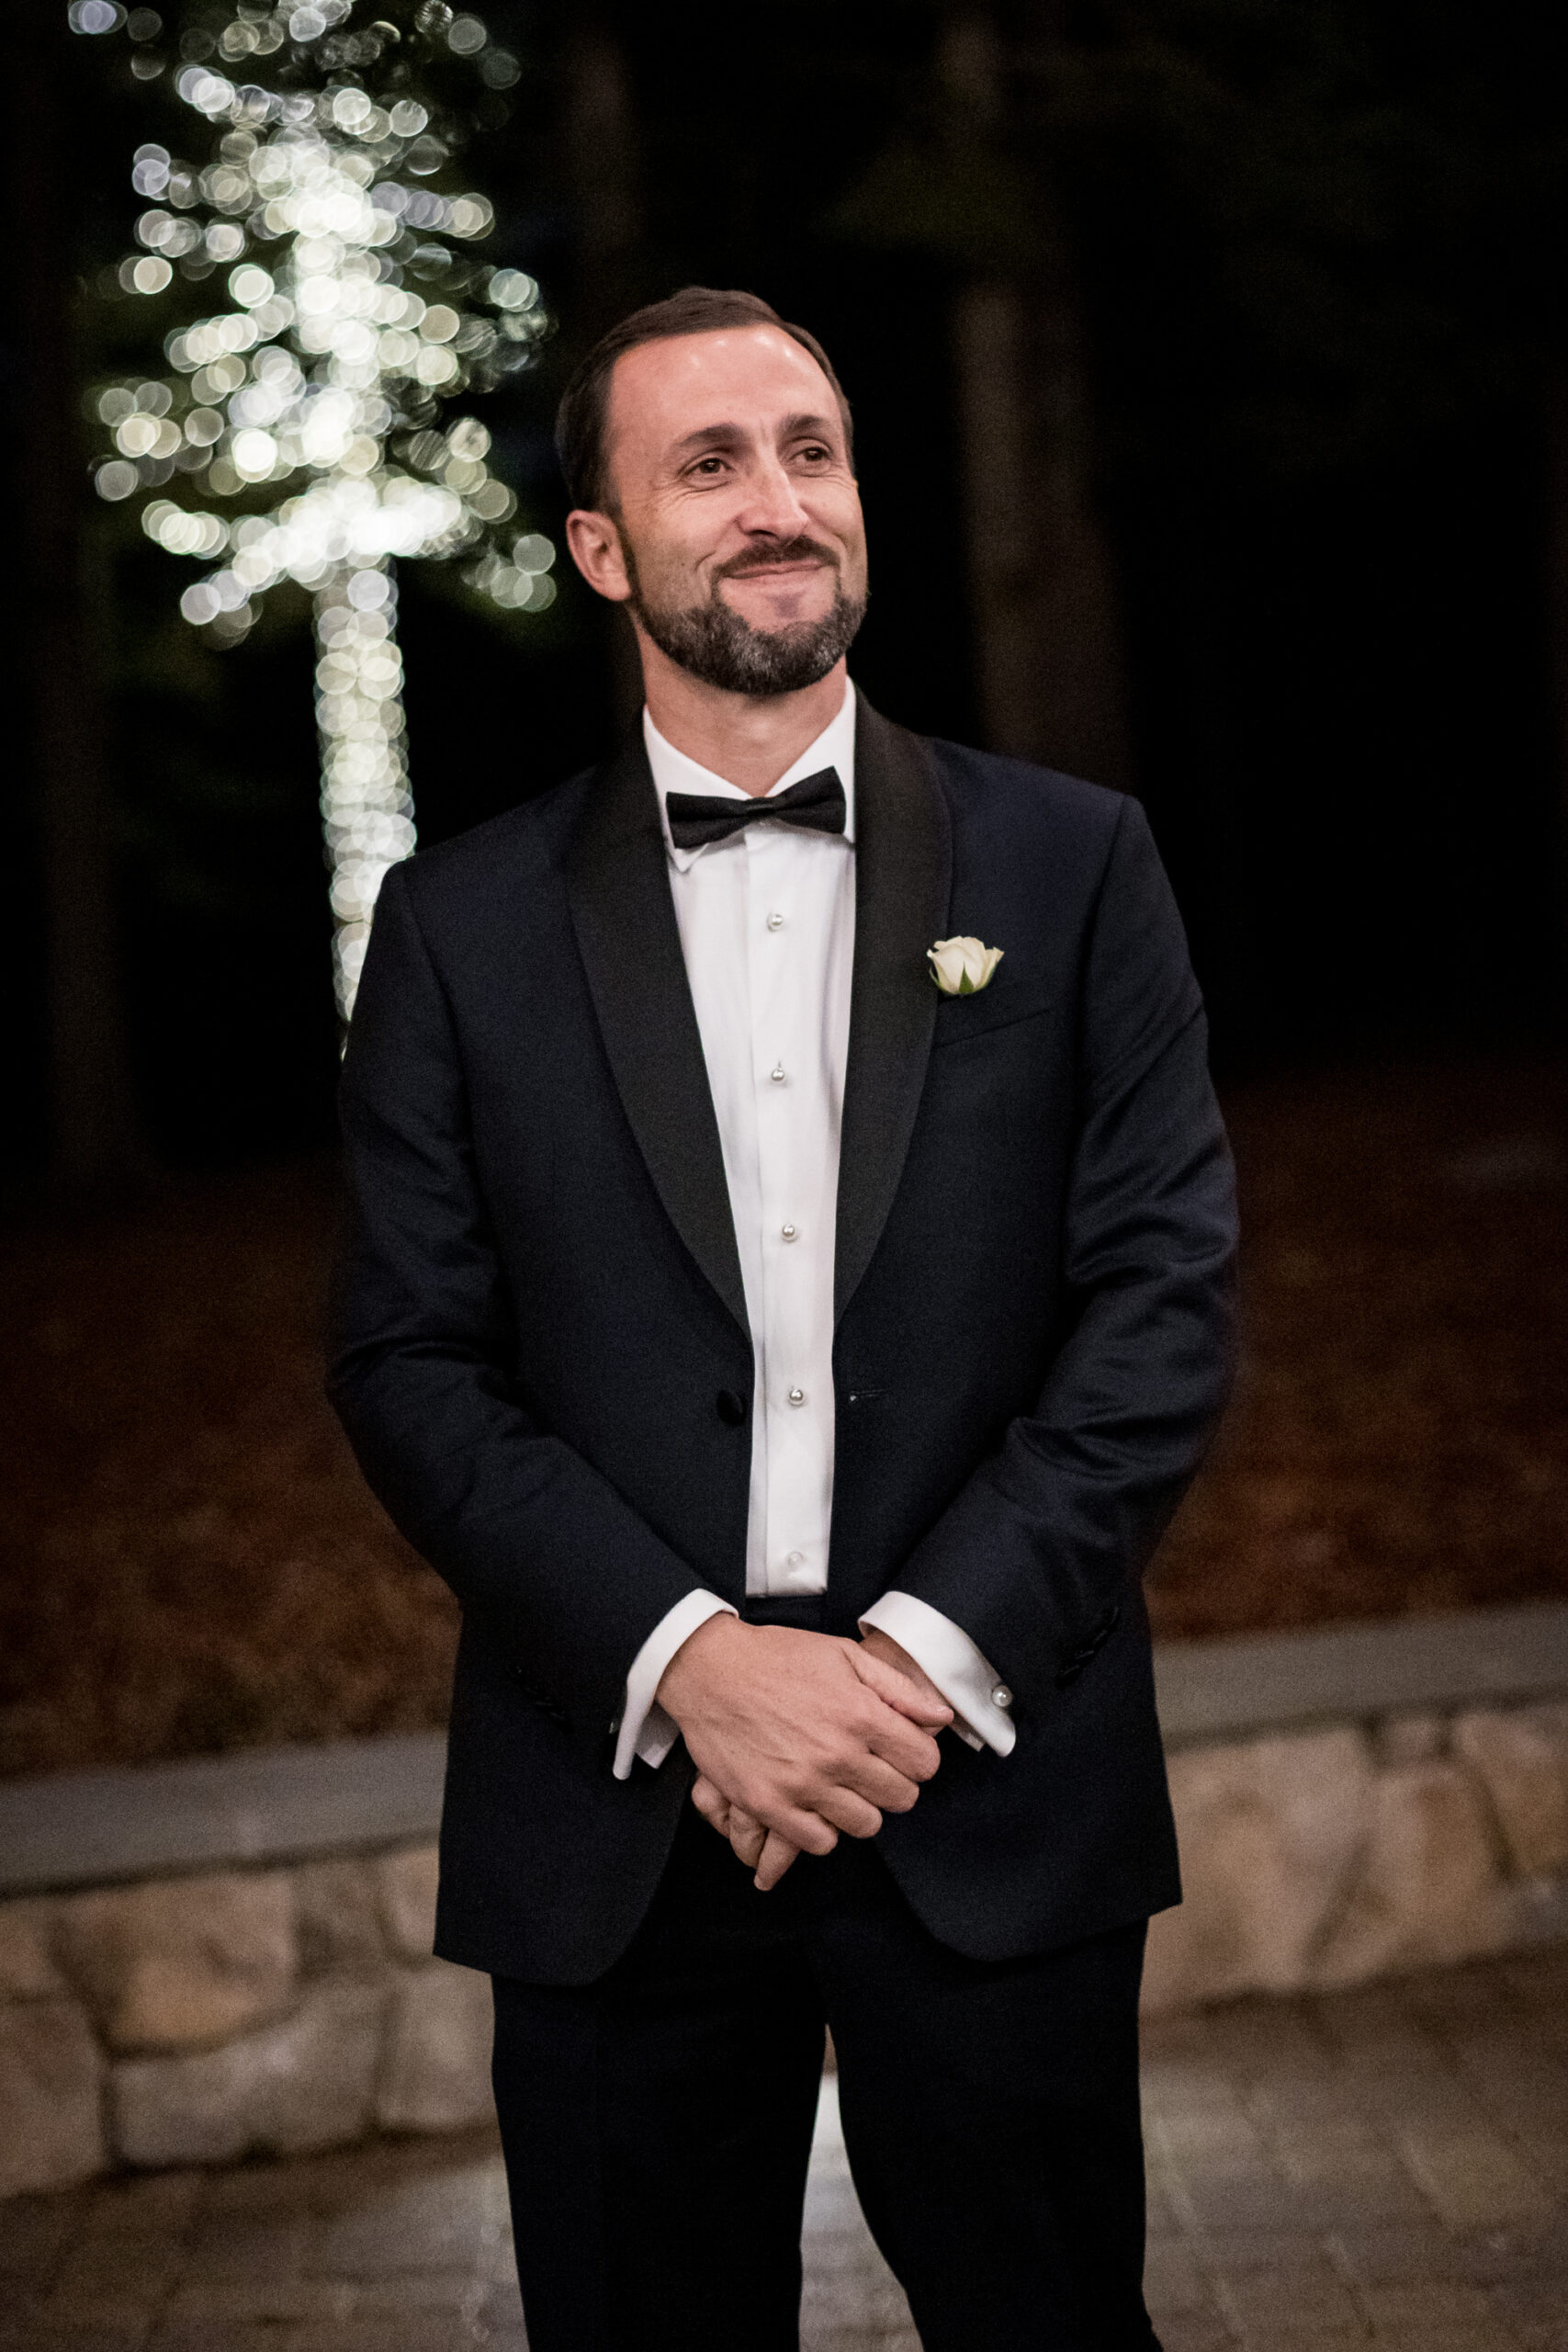 A groom waits for his bride at an outdoor night wedding.